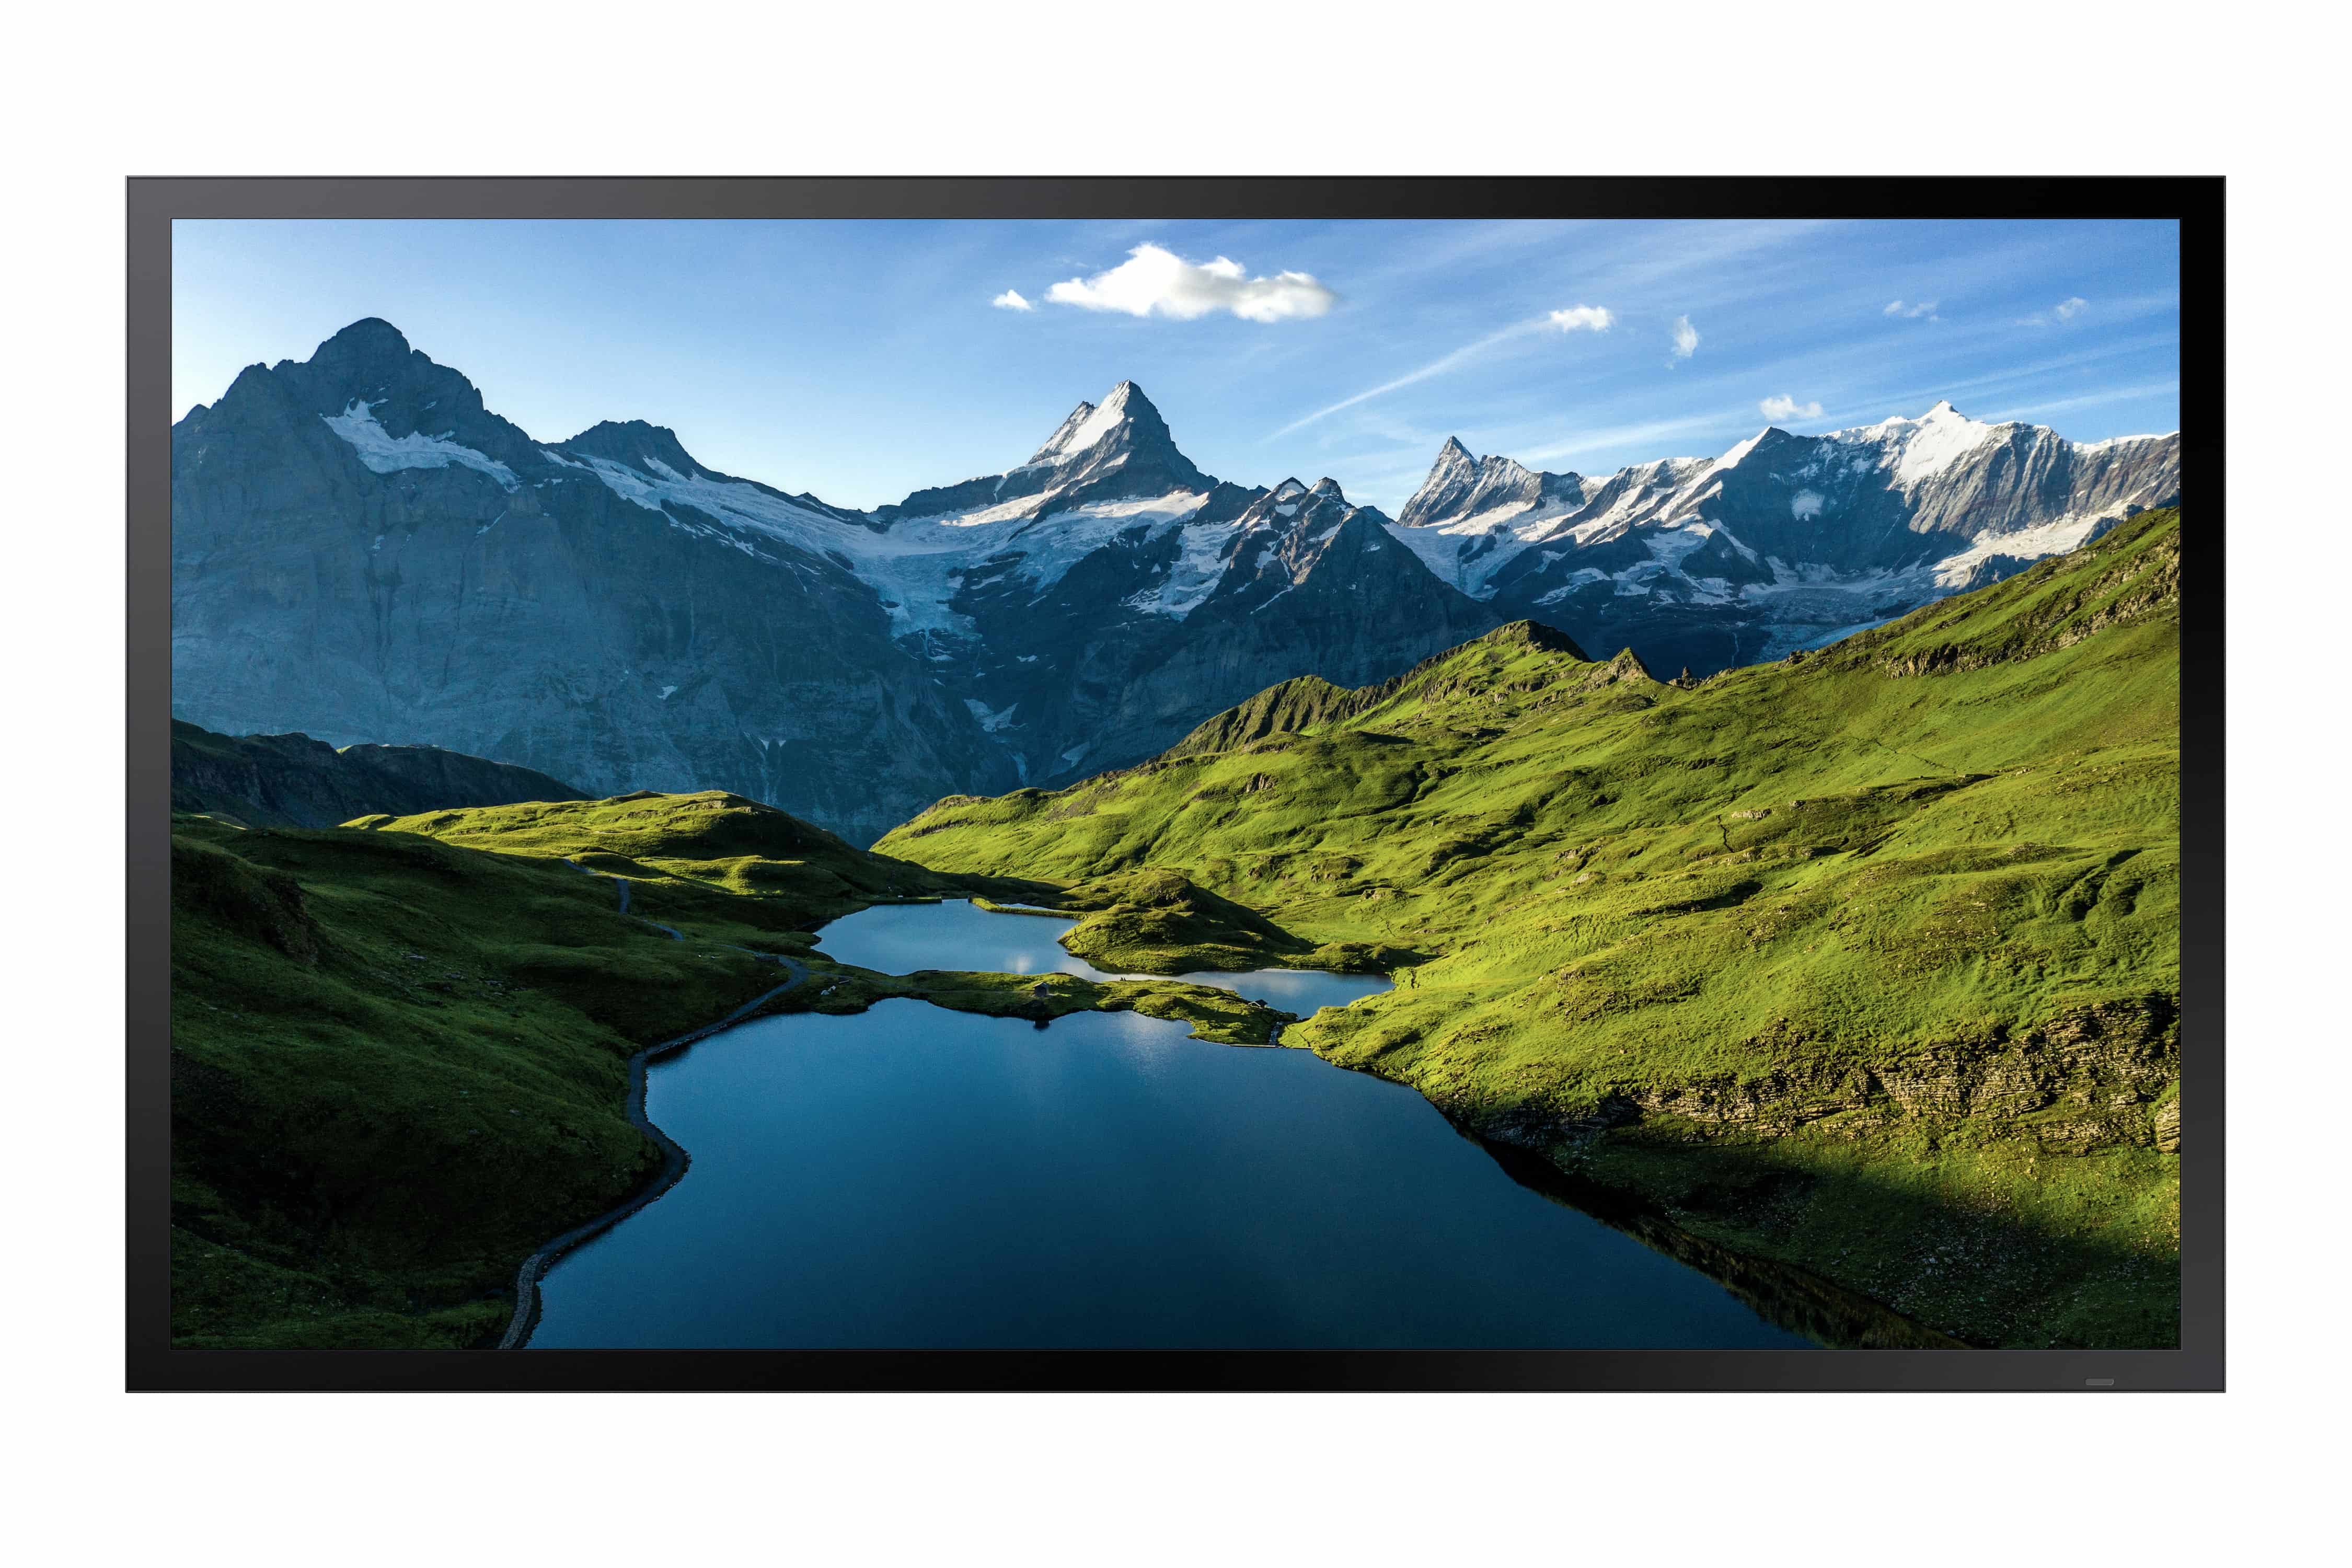 Samsung OH55A-S | 55" | FHD Outdoor Display